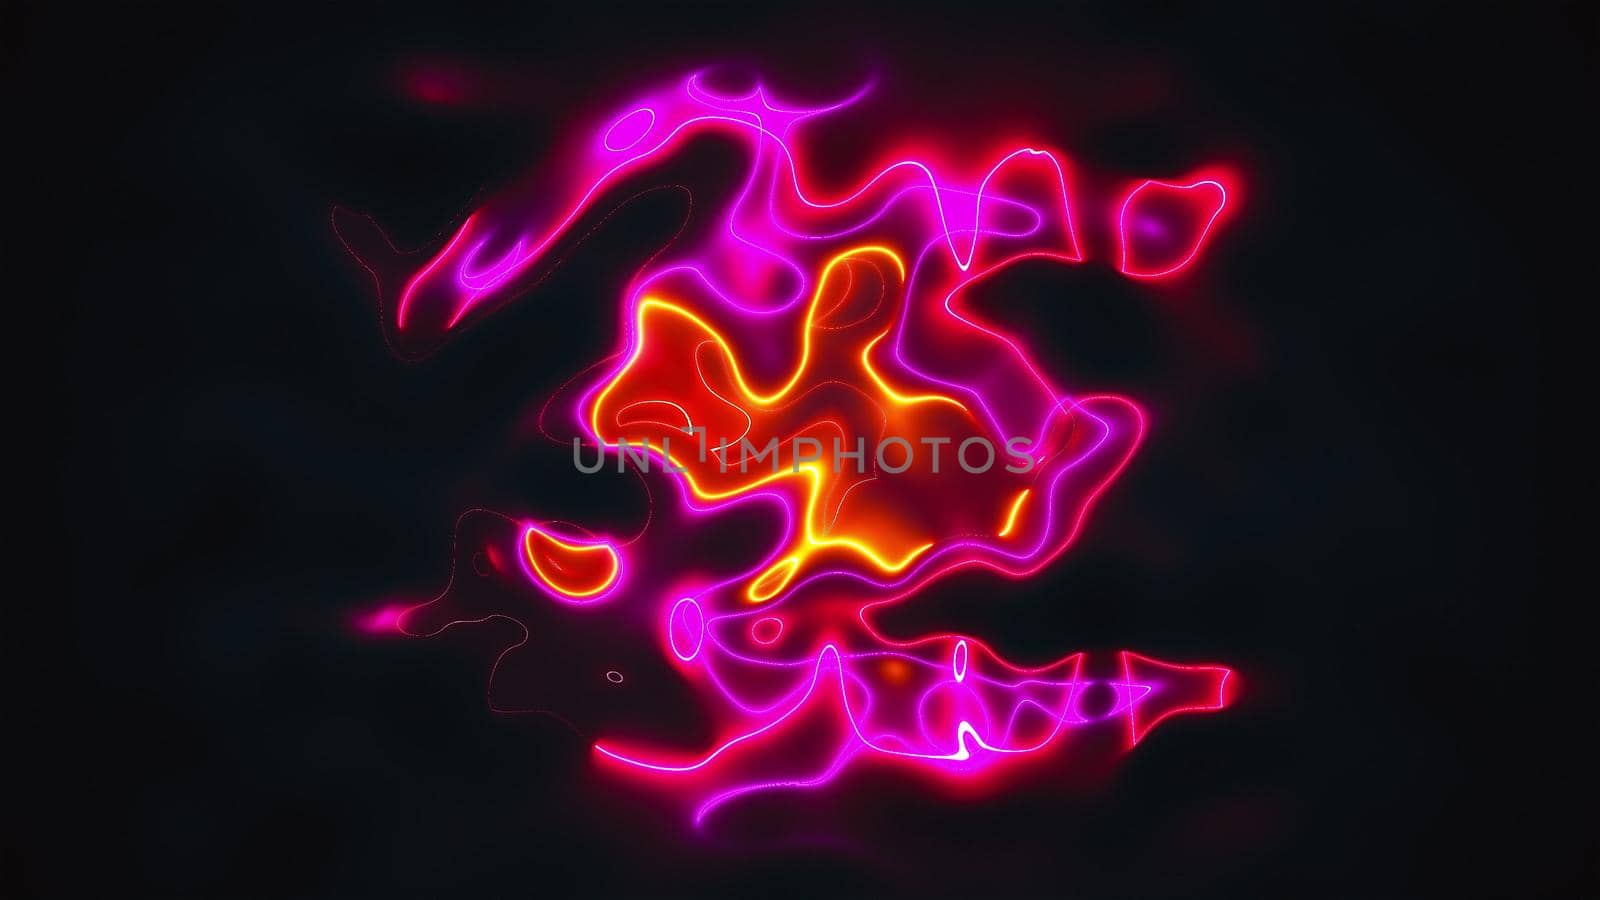 Vivid curves stripes 3d render with geometric blur. Wavy random curvature with gradient and creative lines. Diverging circular digital presentation with varying textures